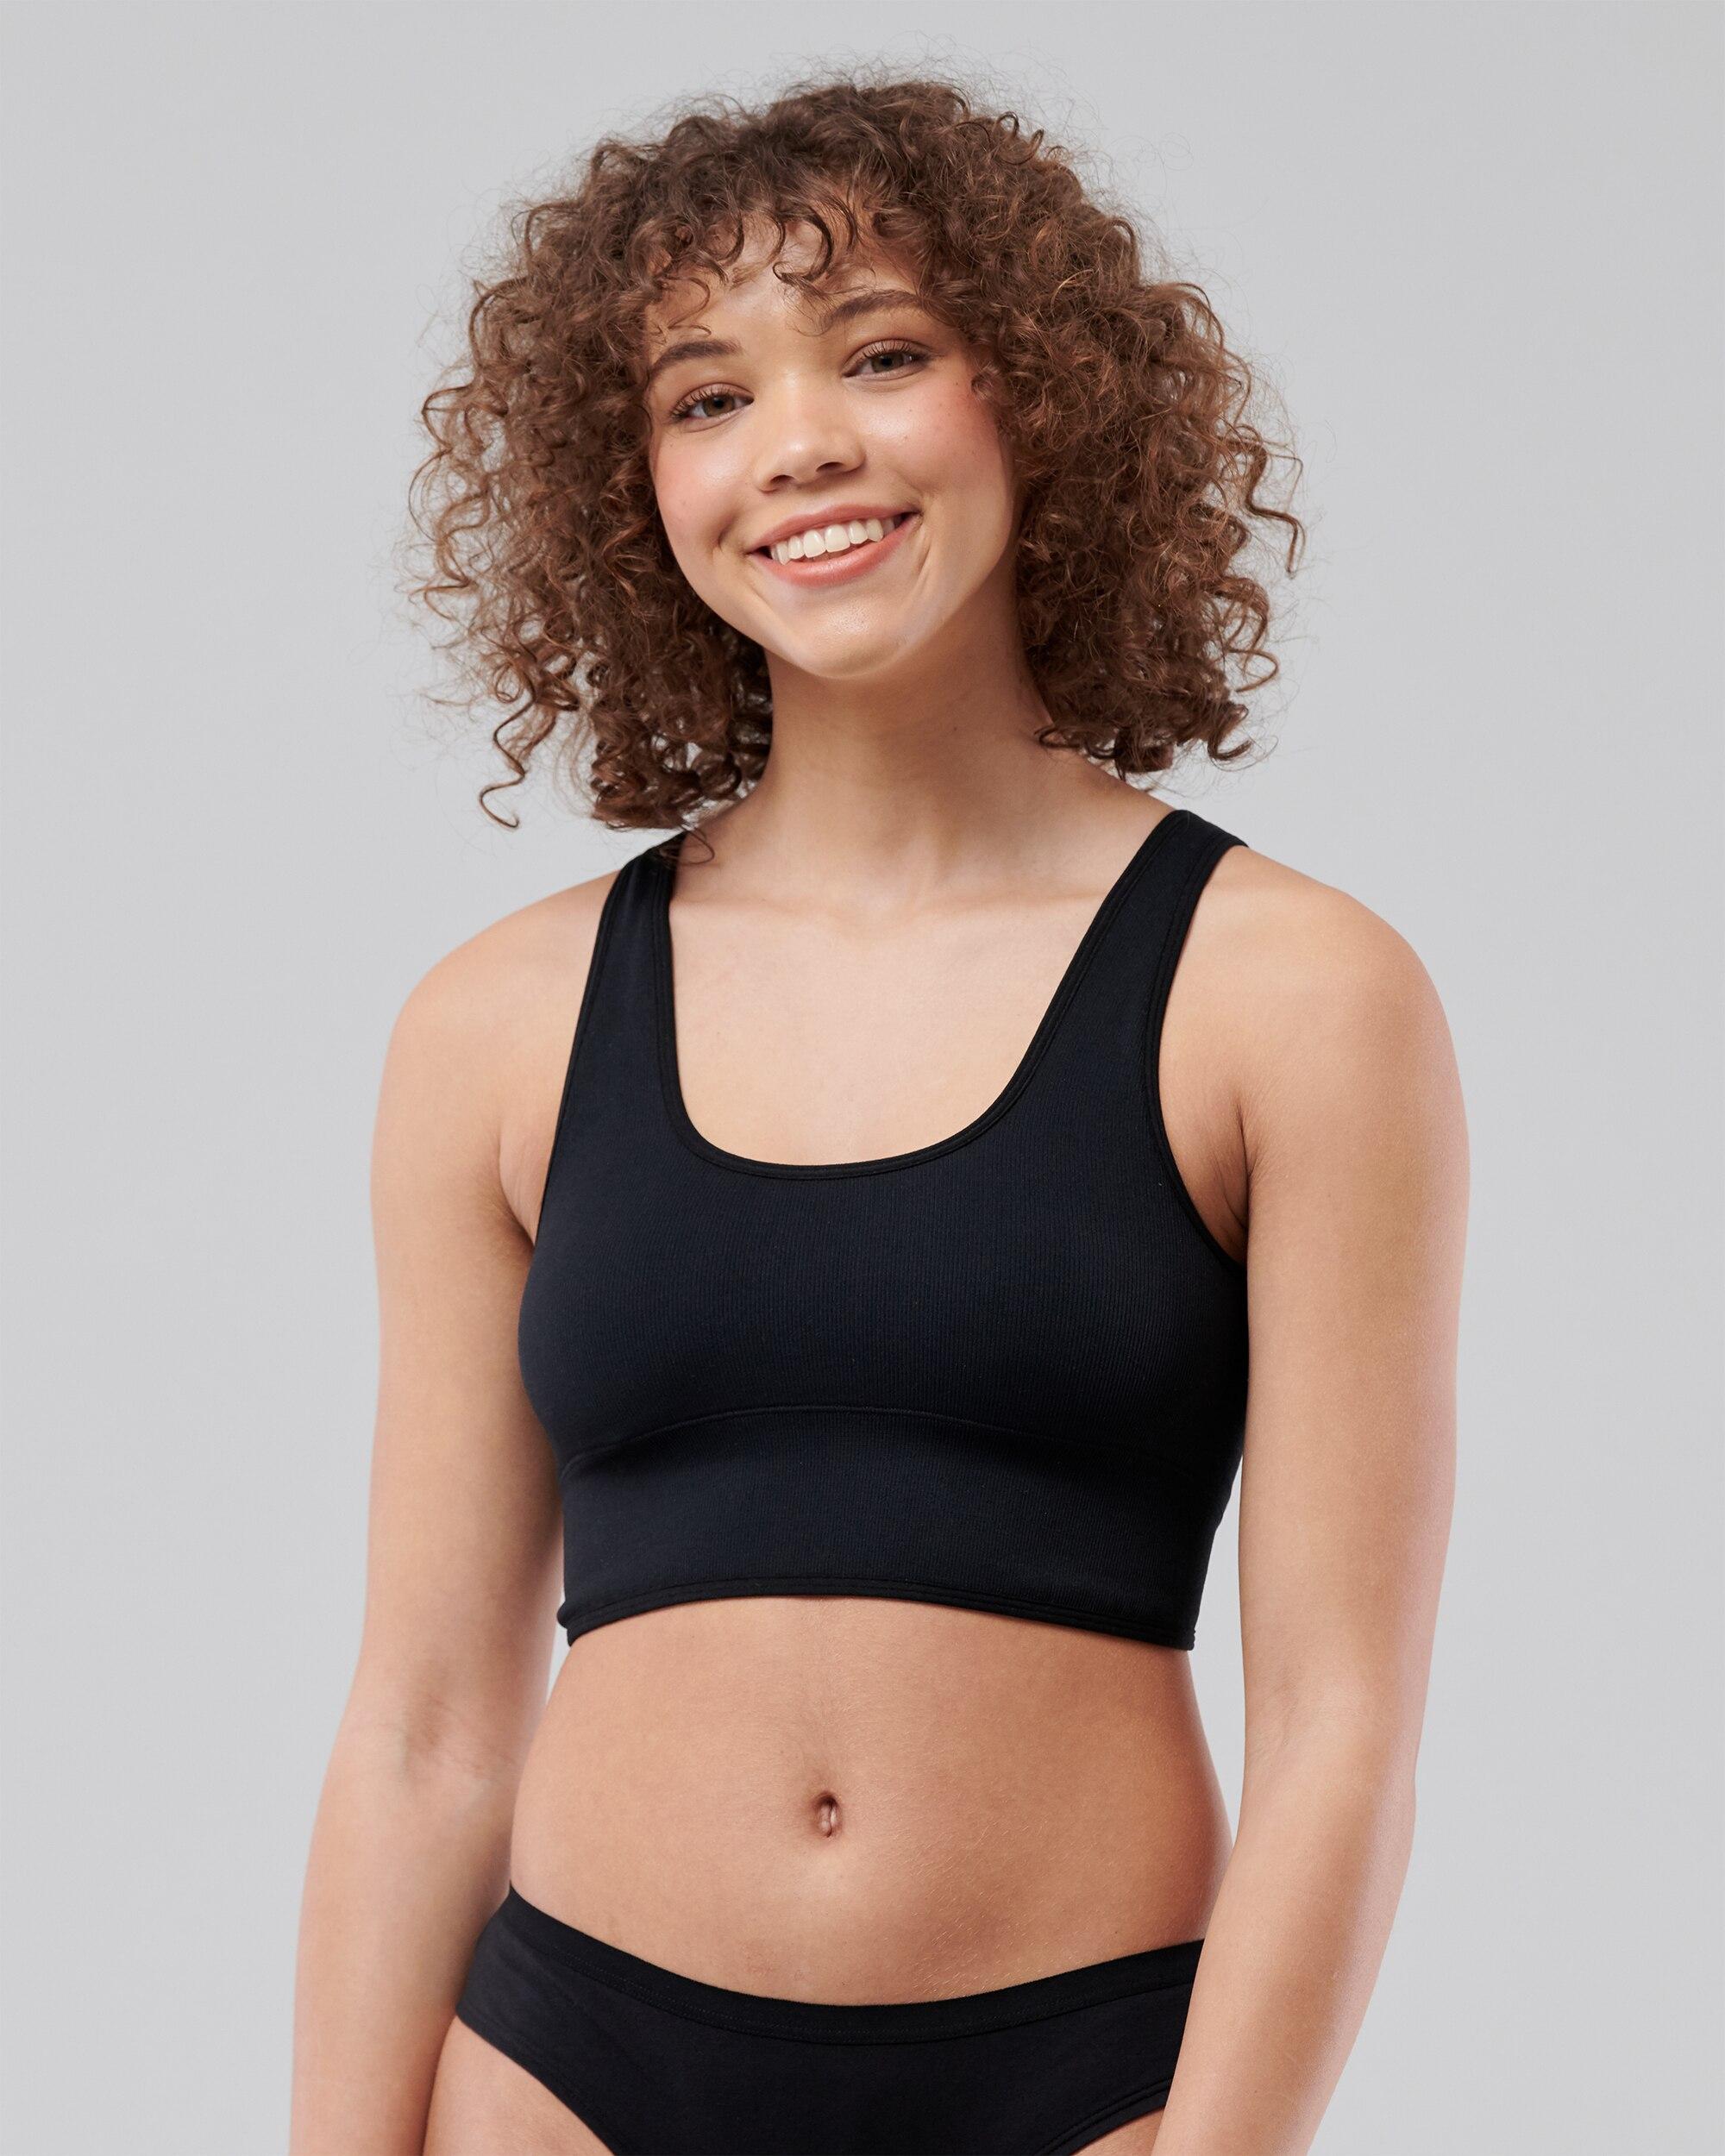 Hollister Gilly Hicks Ribbed Seamless Plunge Bra Top in Black